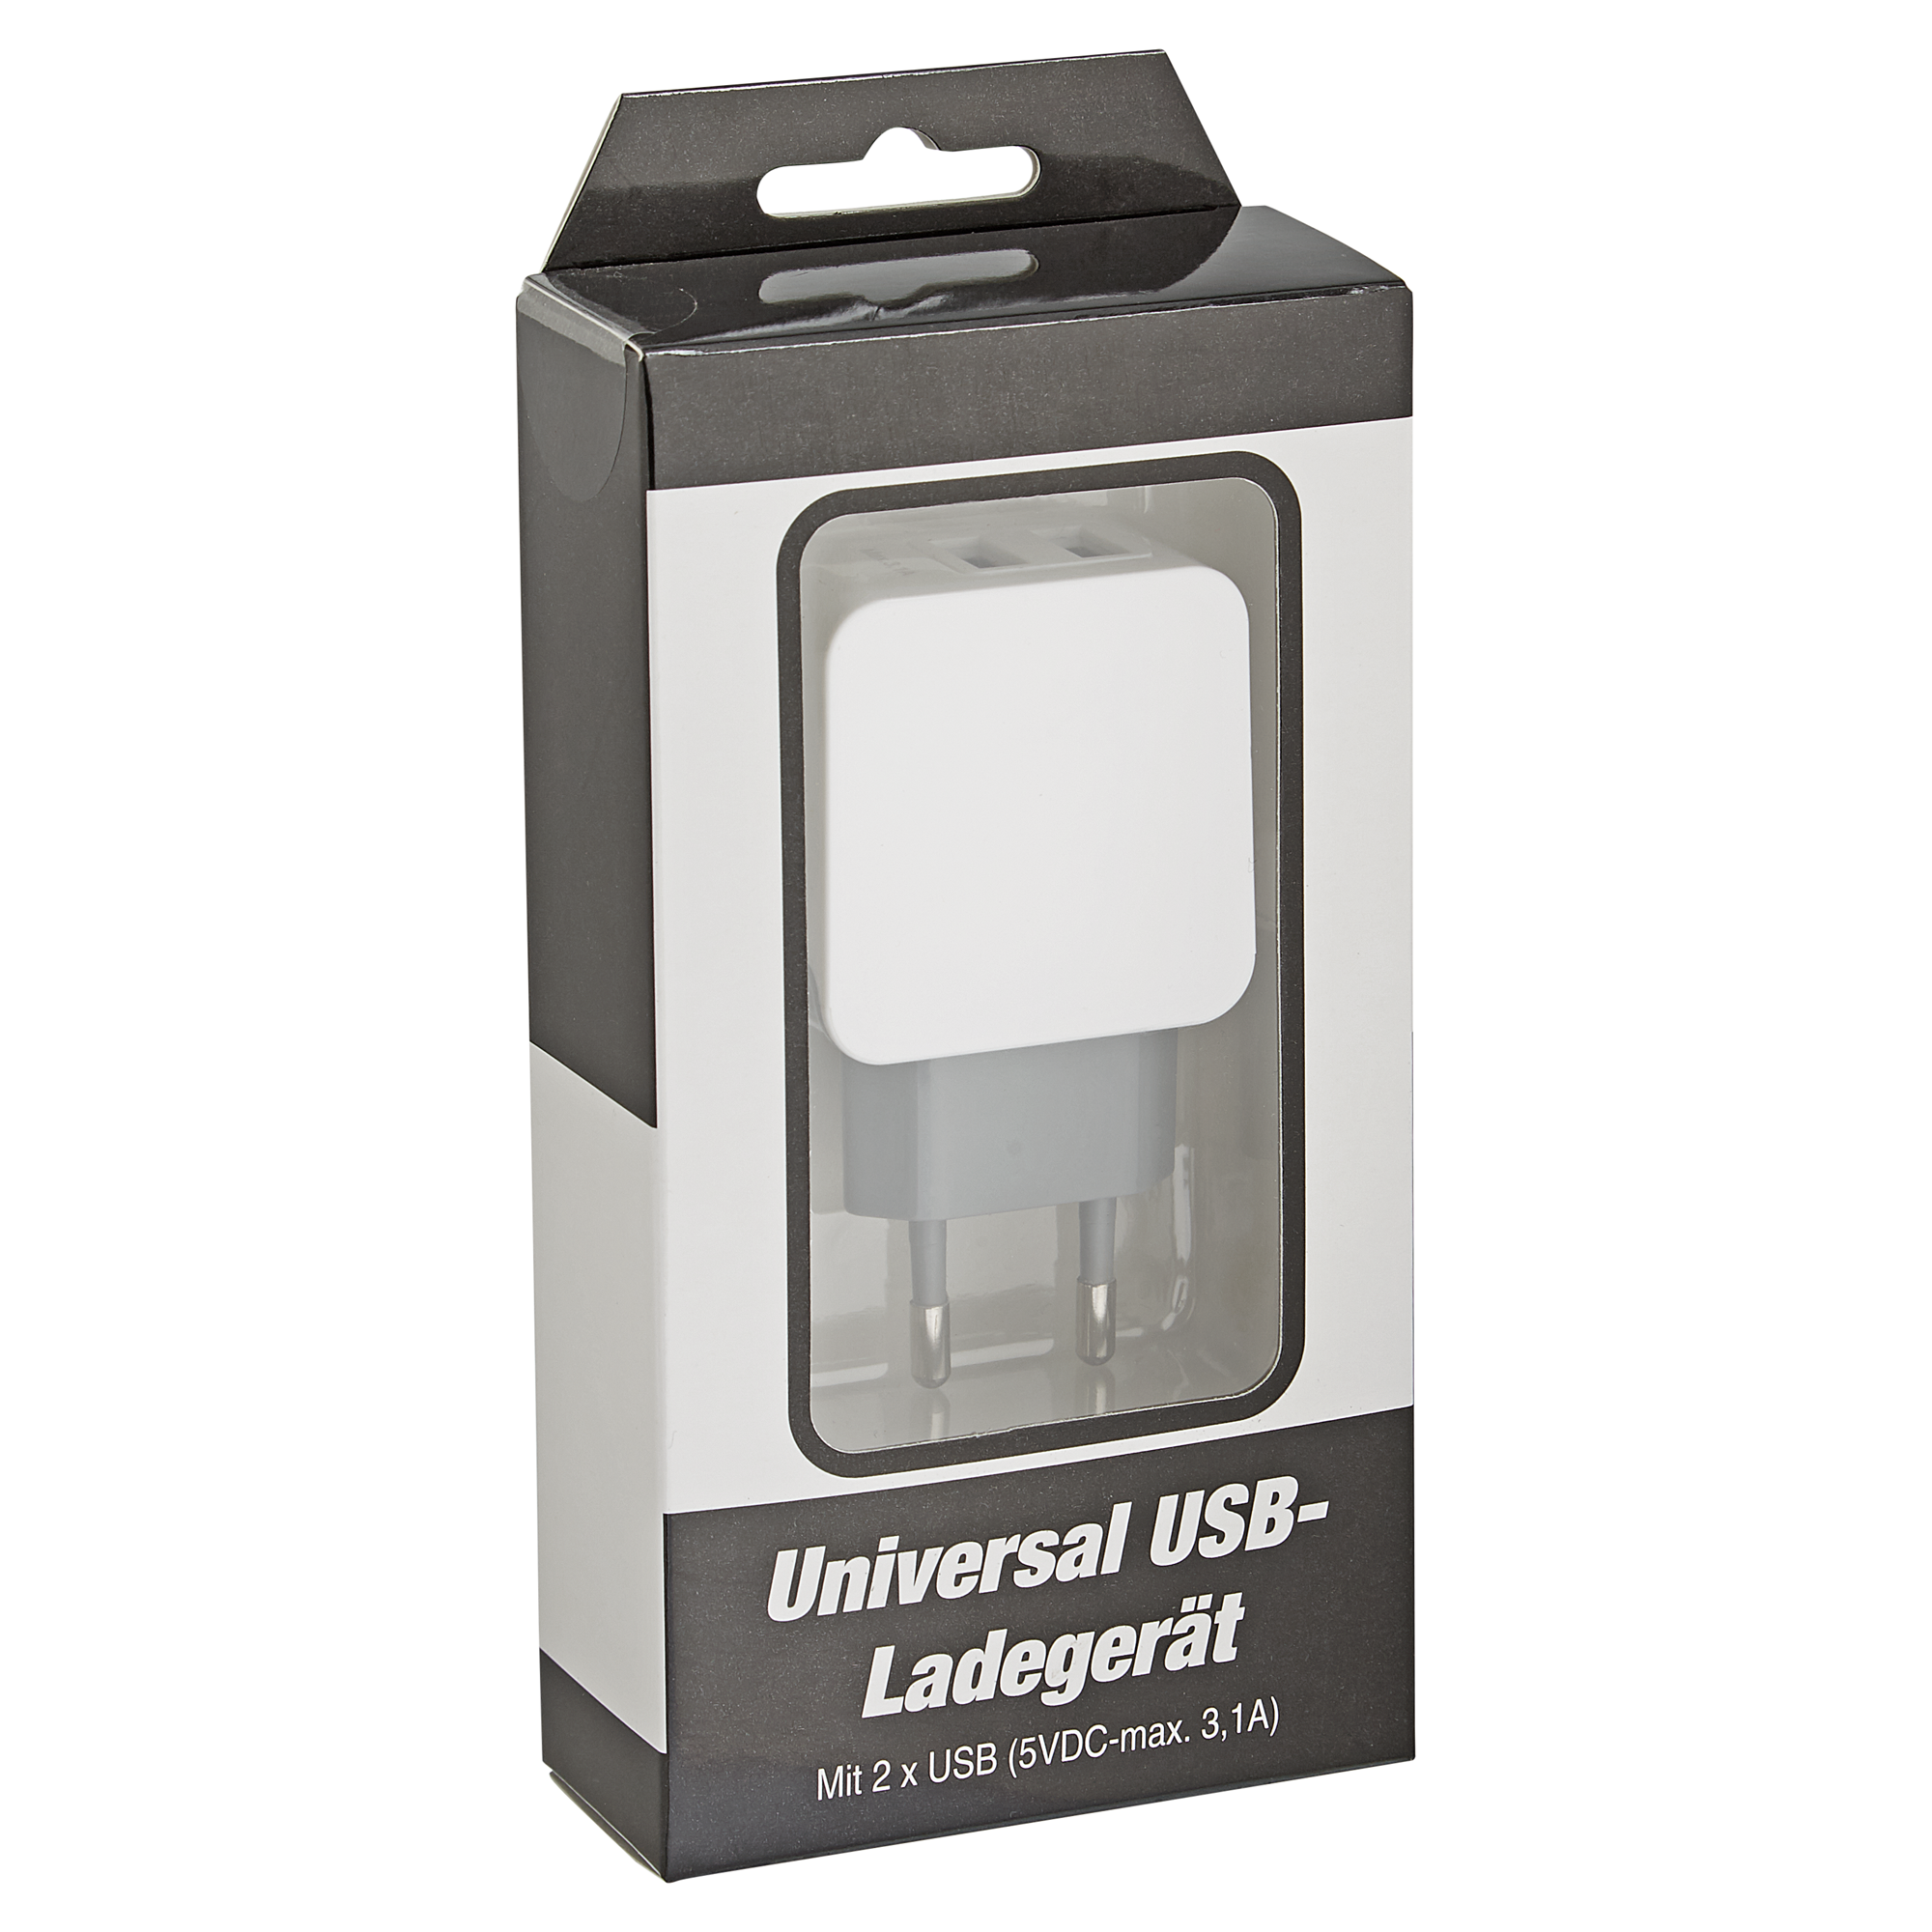 Universal-USB-Ladegerät 2-fach + product picture